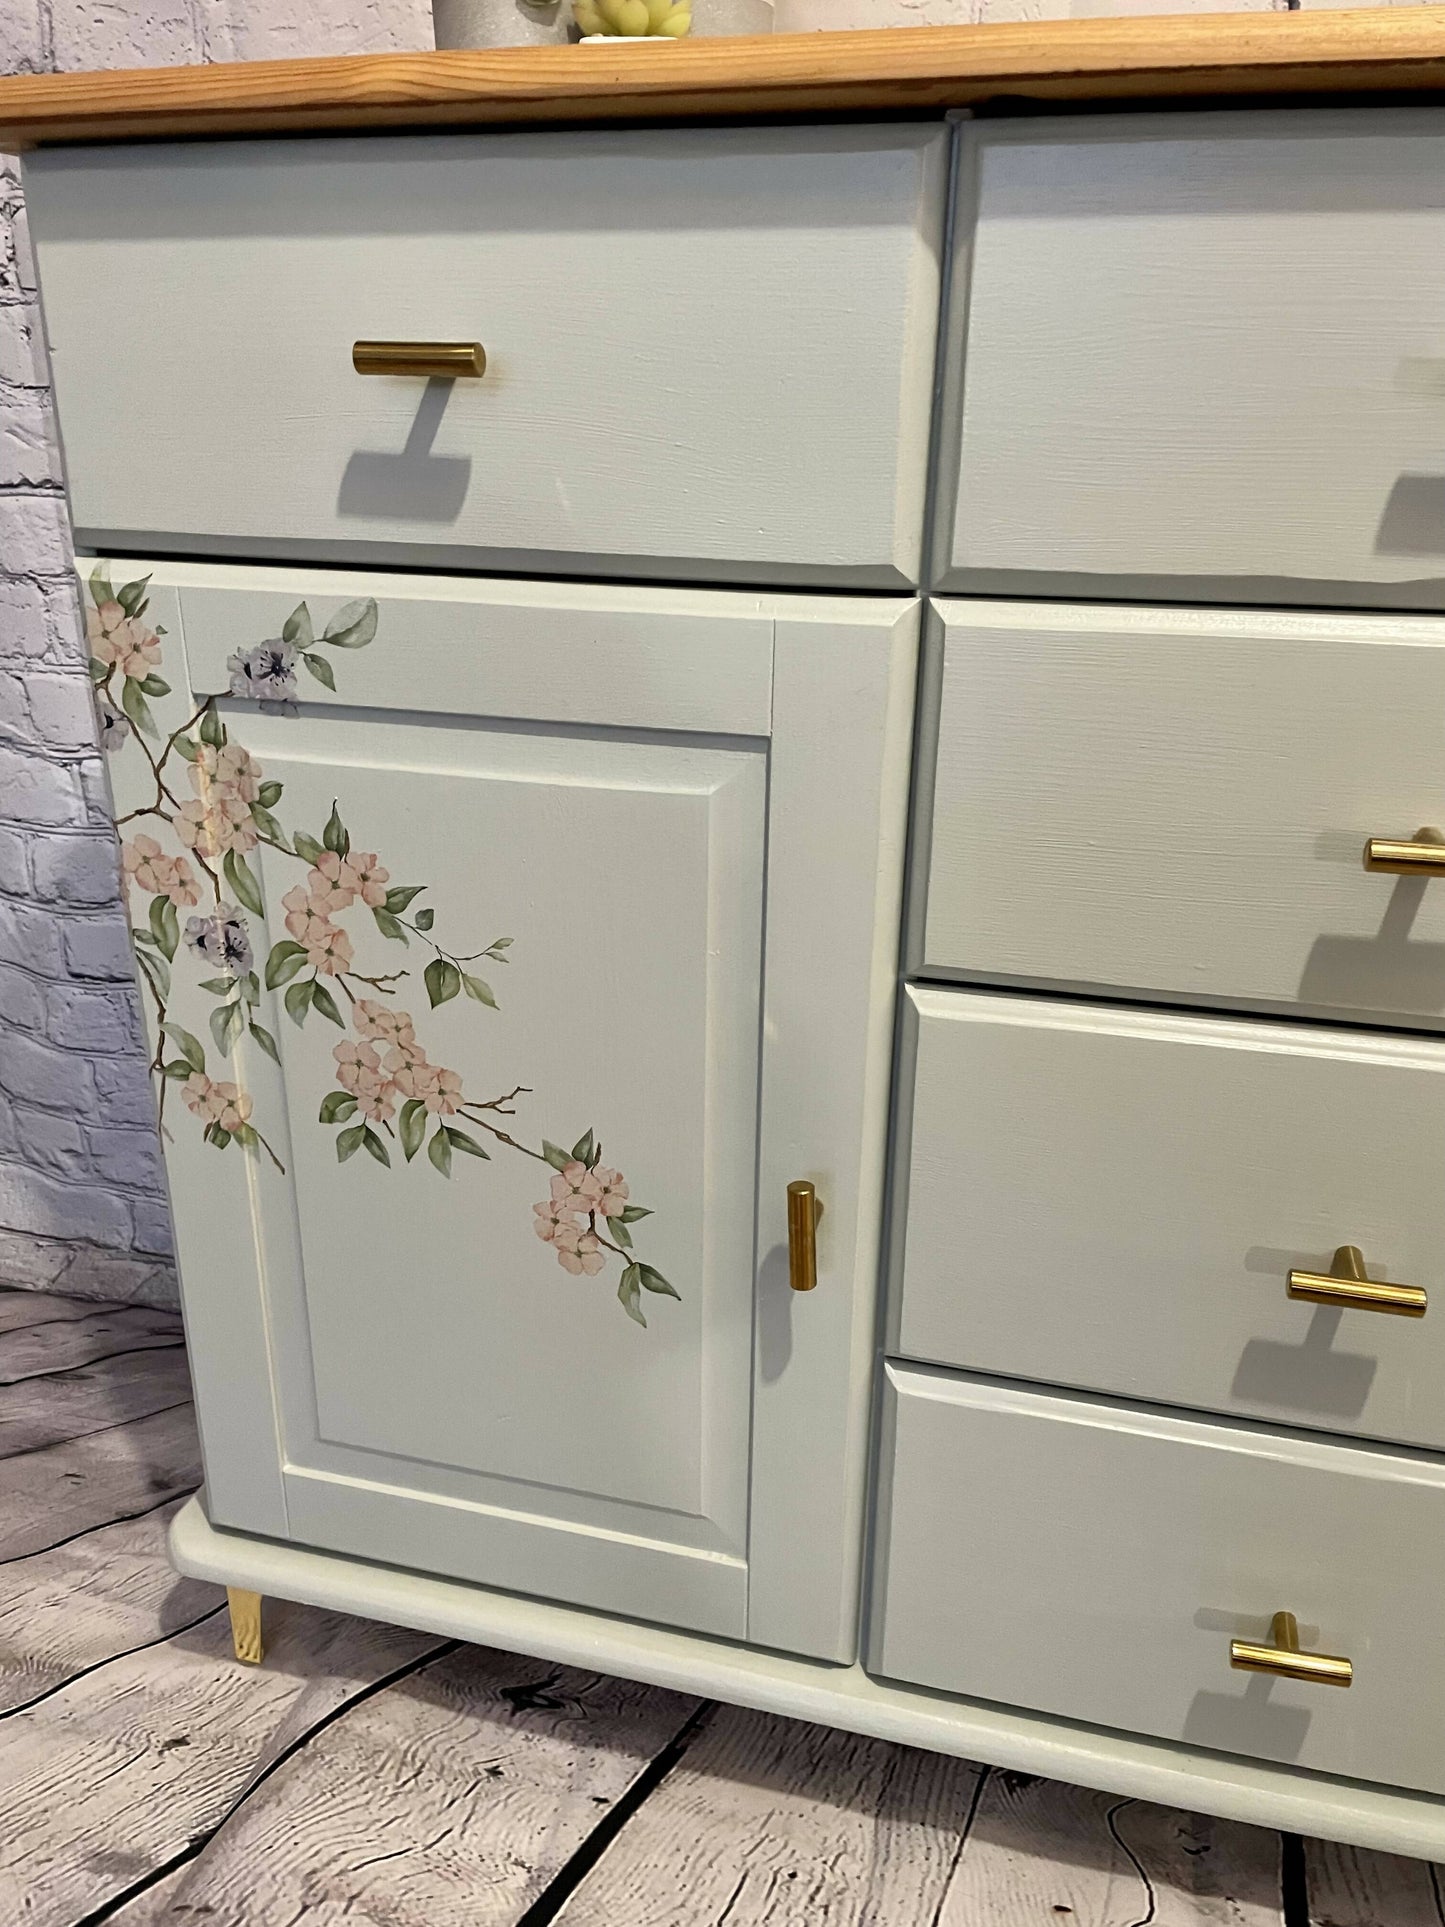 SOLD Hand painted grey/green sideboard with beautiful cherry blossom decoupaged flowers